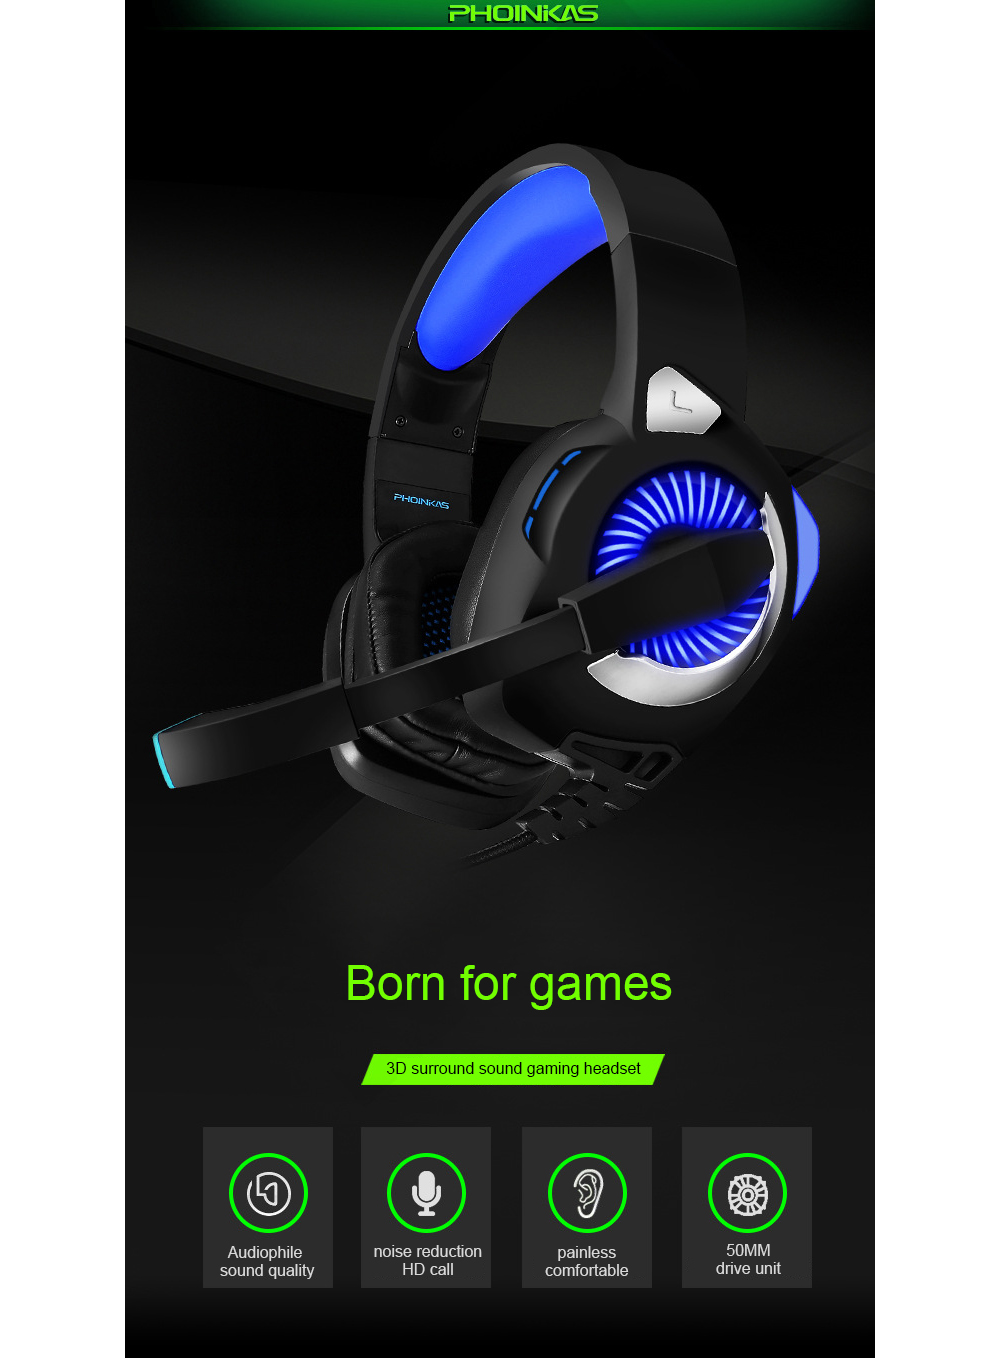 PHOINIKAS-H-9-Gaming-Headset-50mm-Drive-Unit-120deg-Rotating-Microphone-Noise-Reduction-Protein-Leat-1755235-1